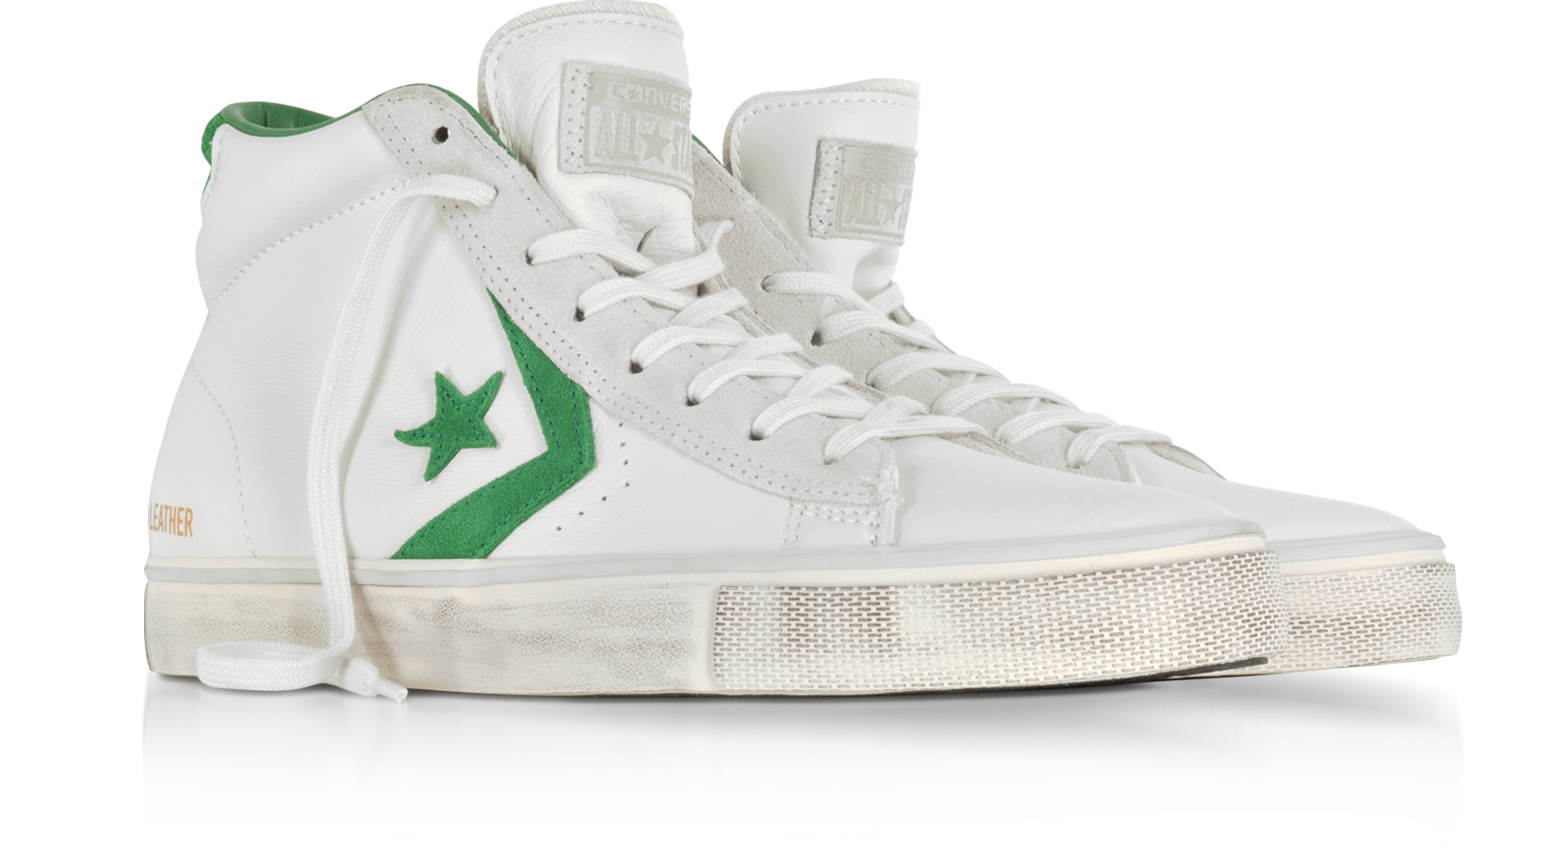 converse pro leather green